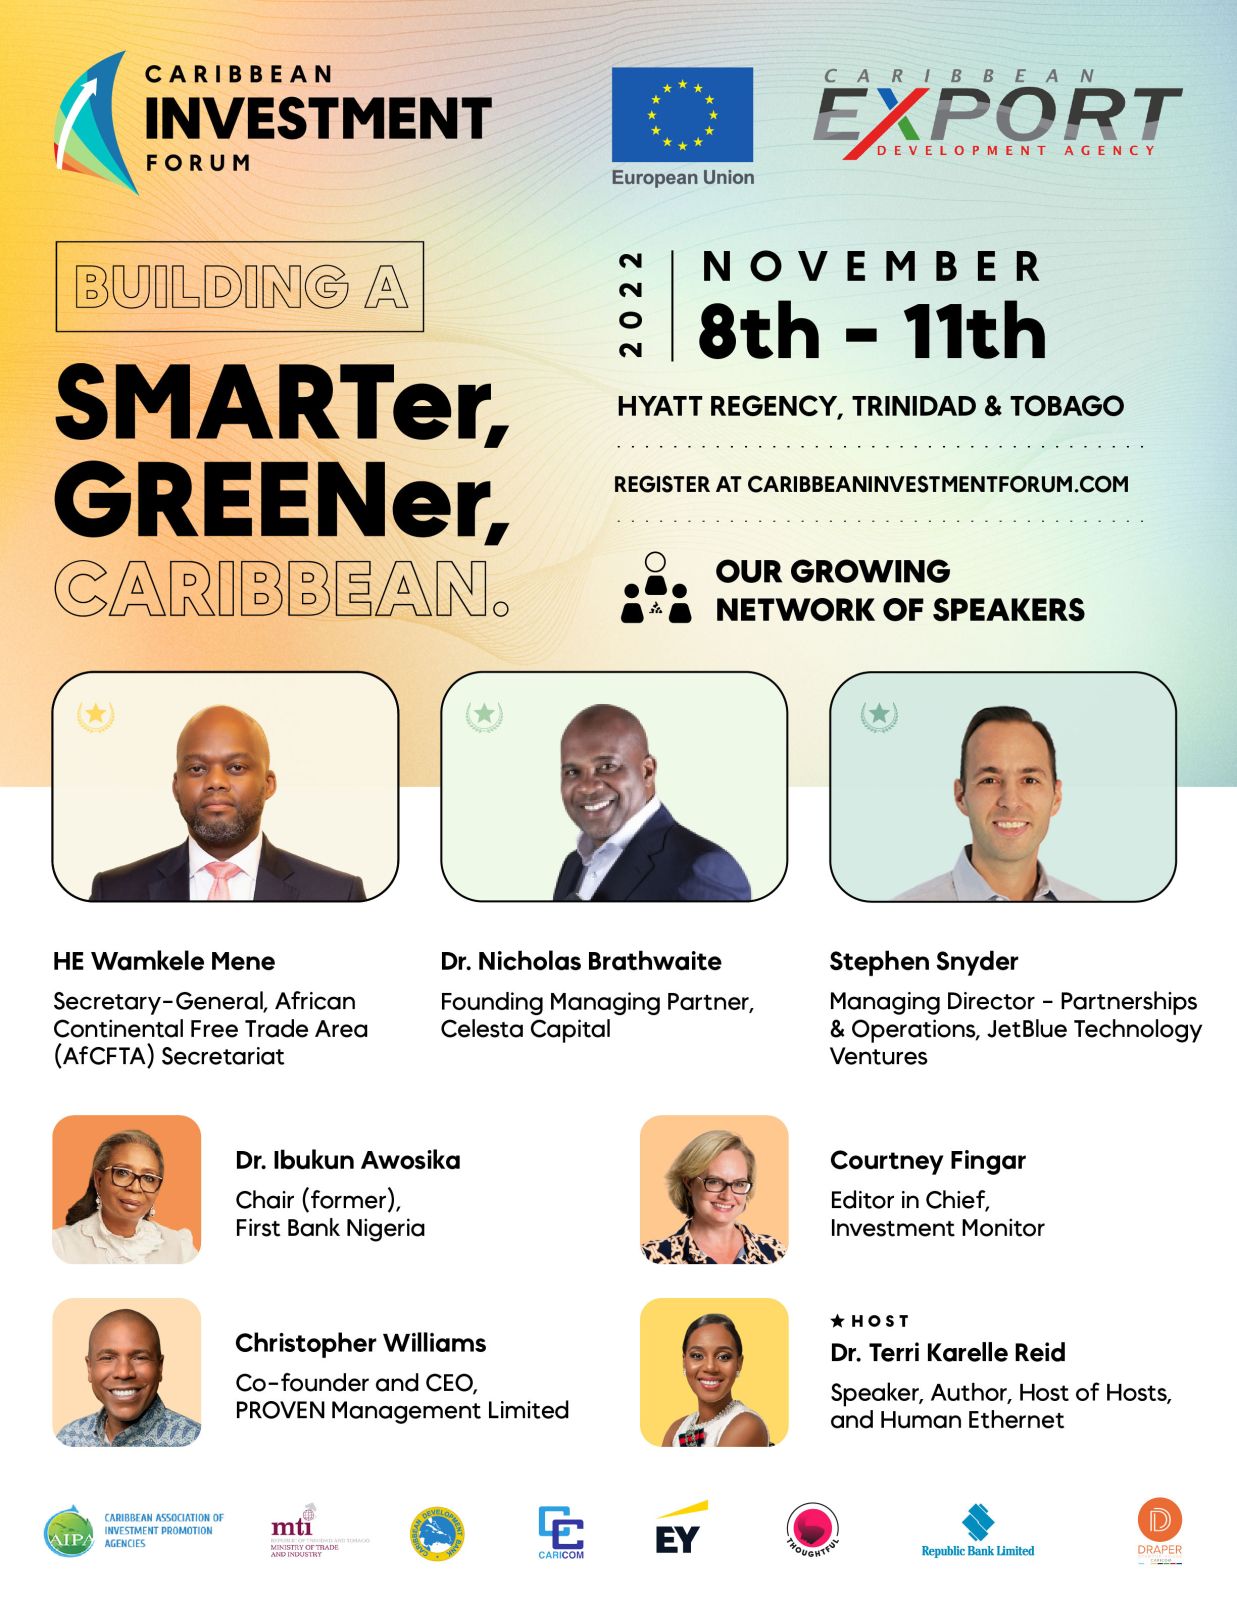 November Investment Forum to Focus on Building a Smarter, Greener Caribbean Photo